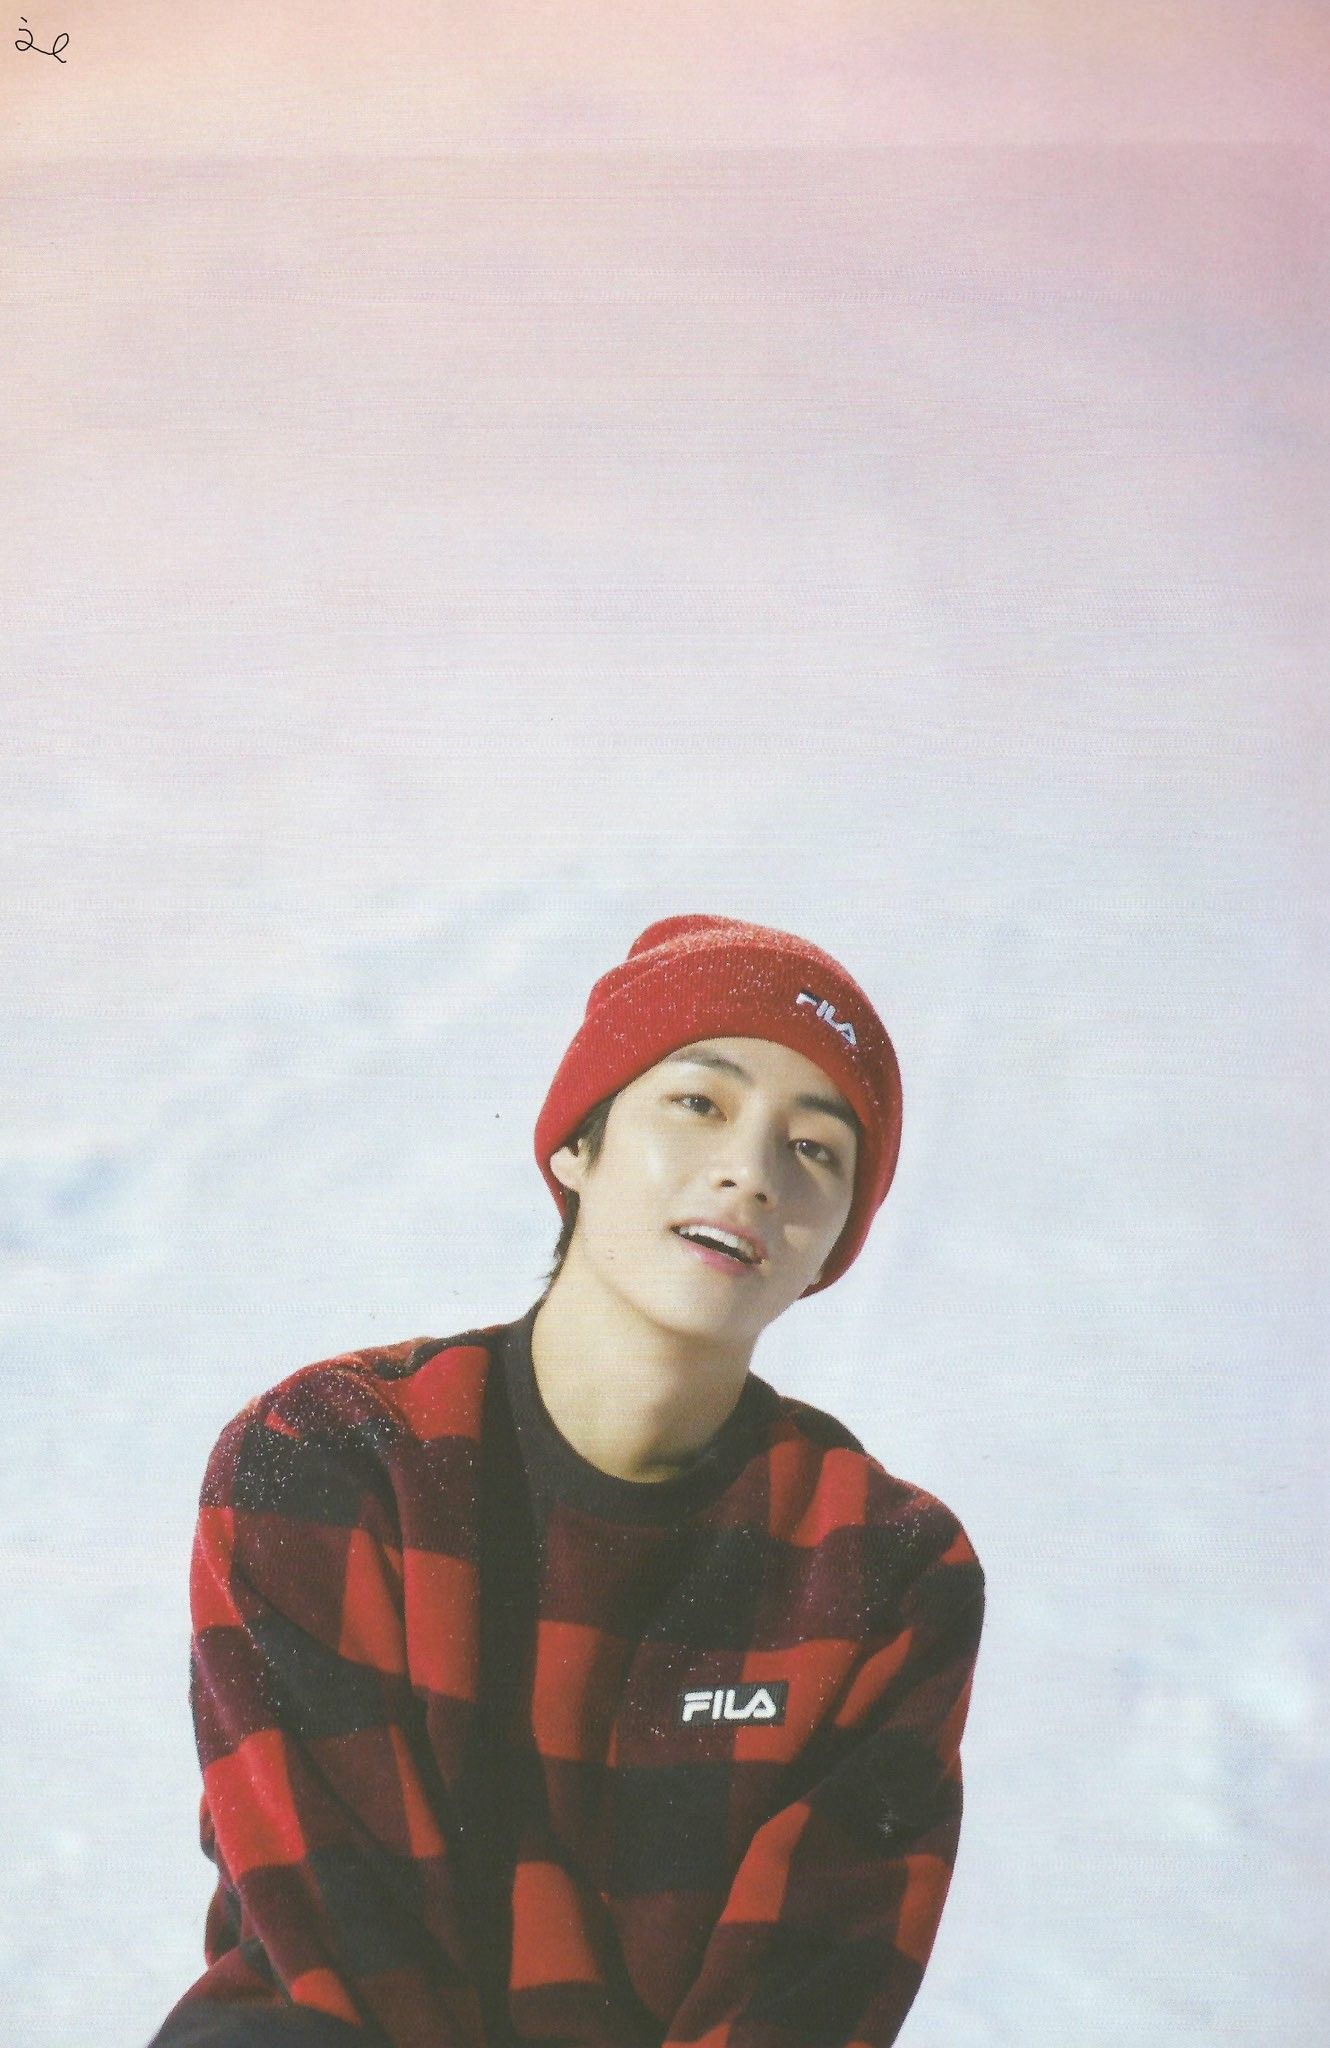 SCAN) 2020 BTS Winter Package. Bts taehyung, V taehyung